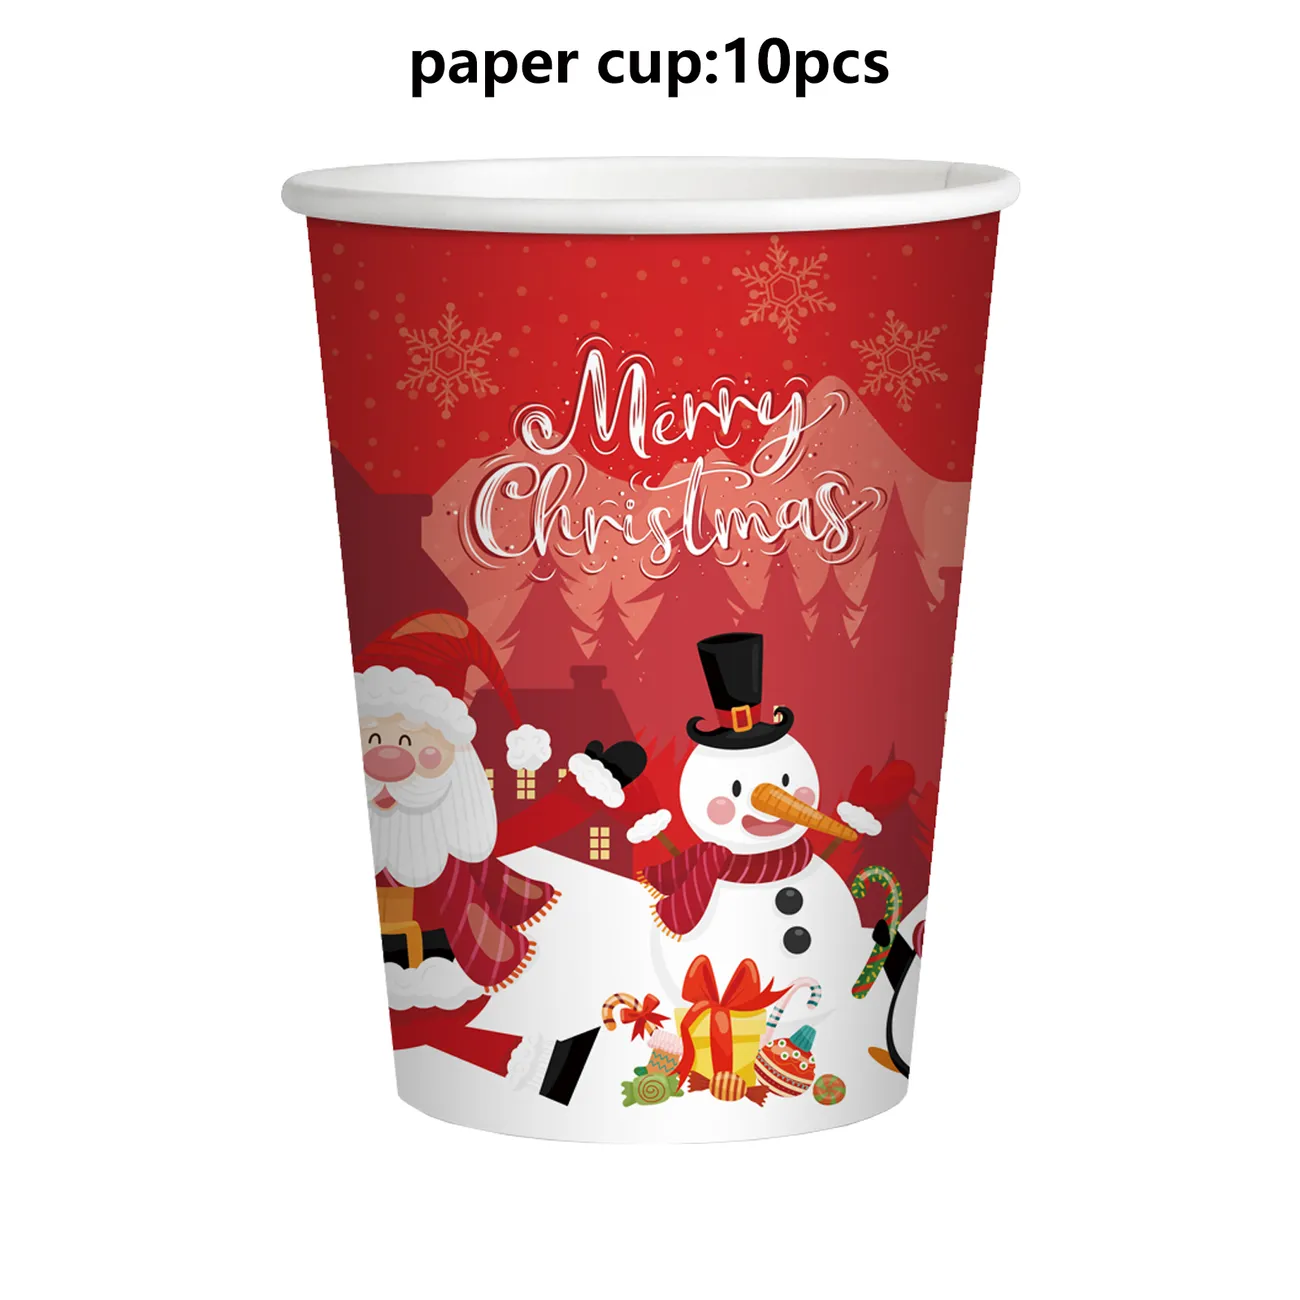 Combo Red Cartoon Santa Claus Themed Holiday Party Decoration Set: Paper Plates, Cups, Tablecloth, Cutlery, and Balloons  big image 1